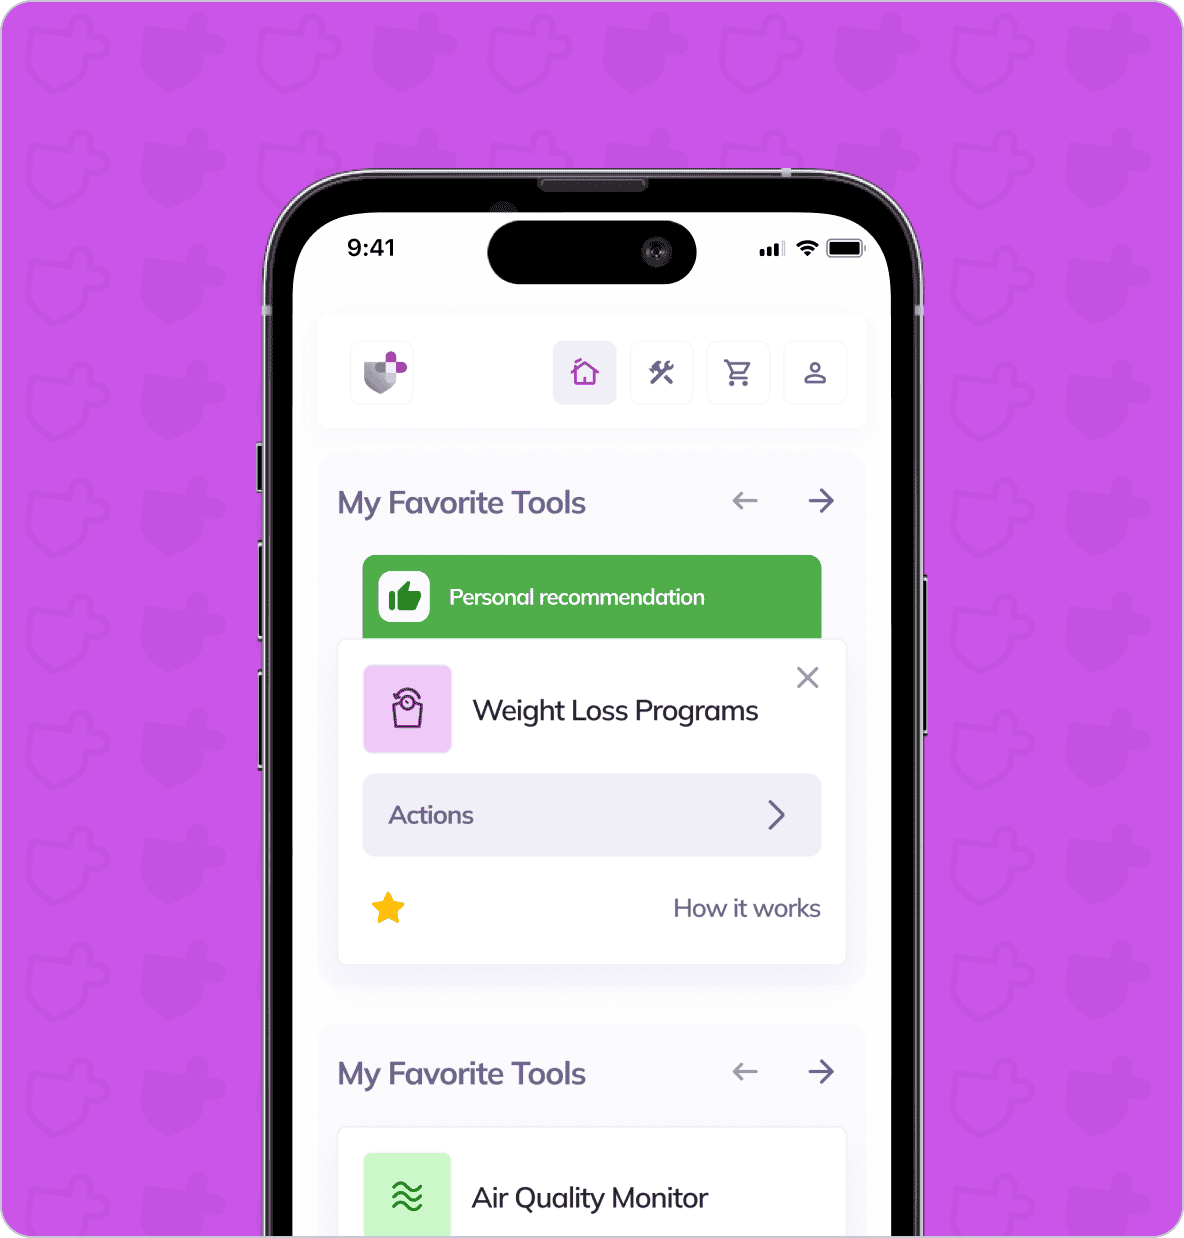 A smartphone screen displays an app with the section "My Favorite Tools". A personal recommendation for "Weight Loss Programs" is highlighted in green. The background is purple with shield icons.